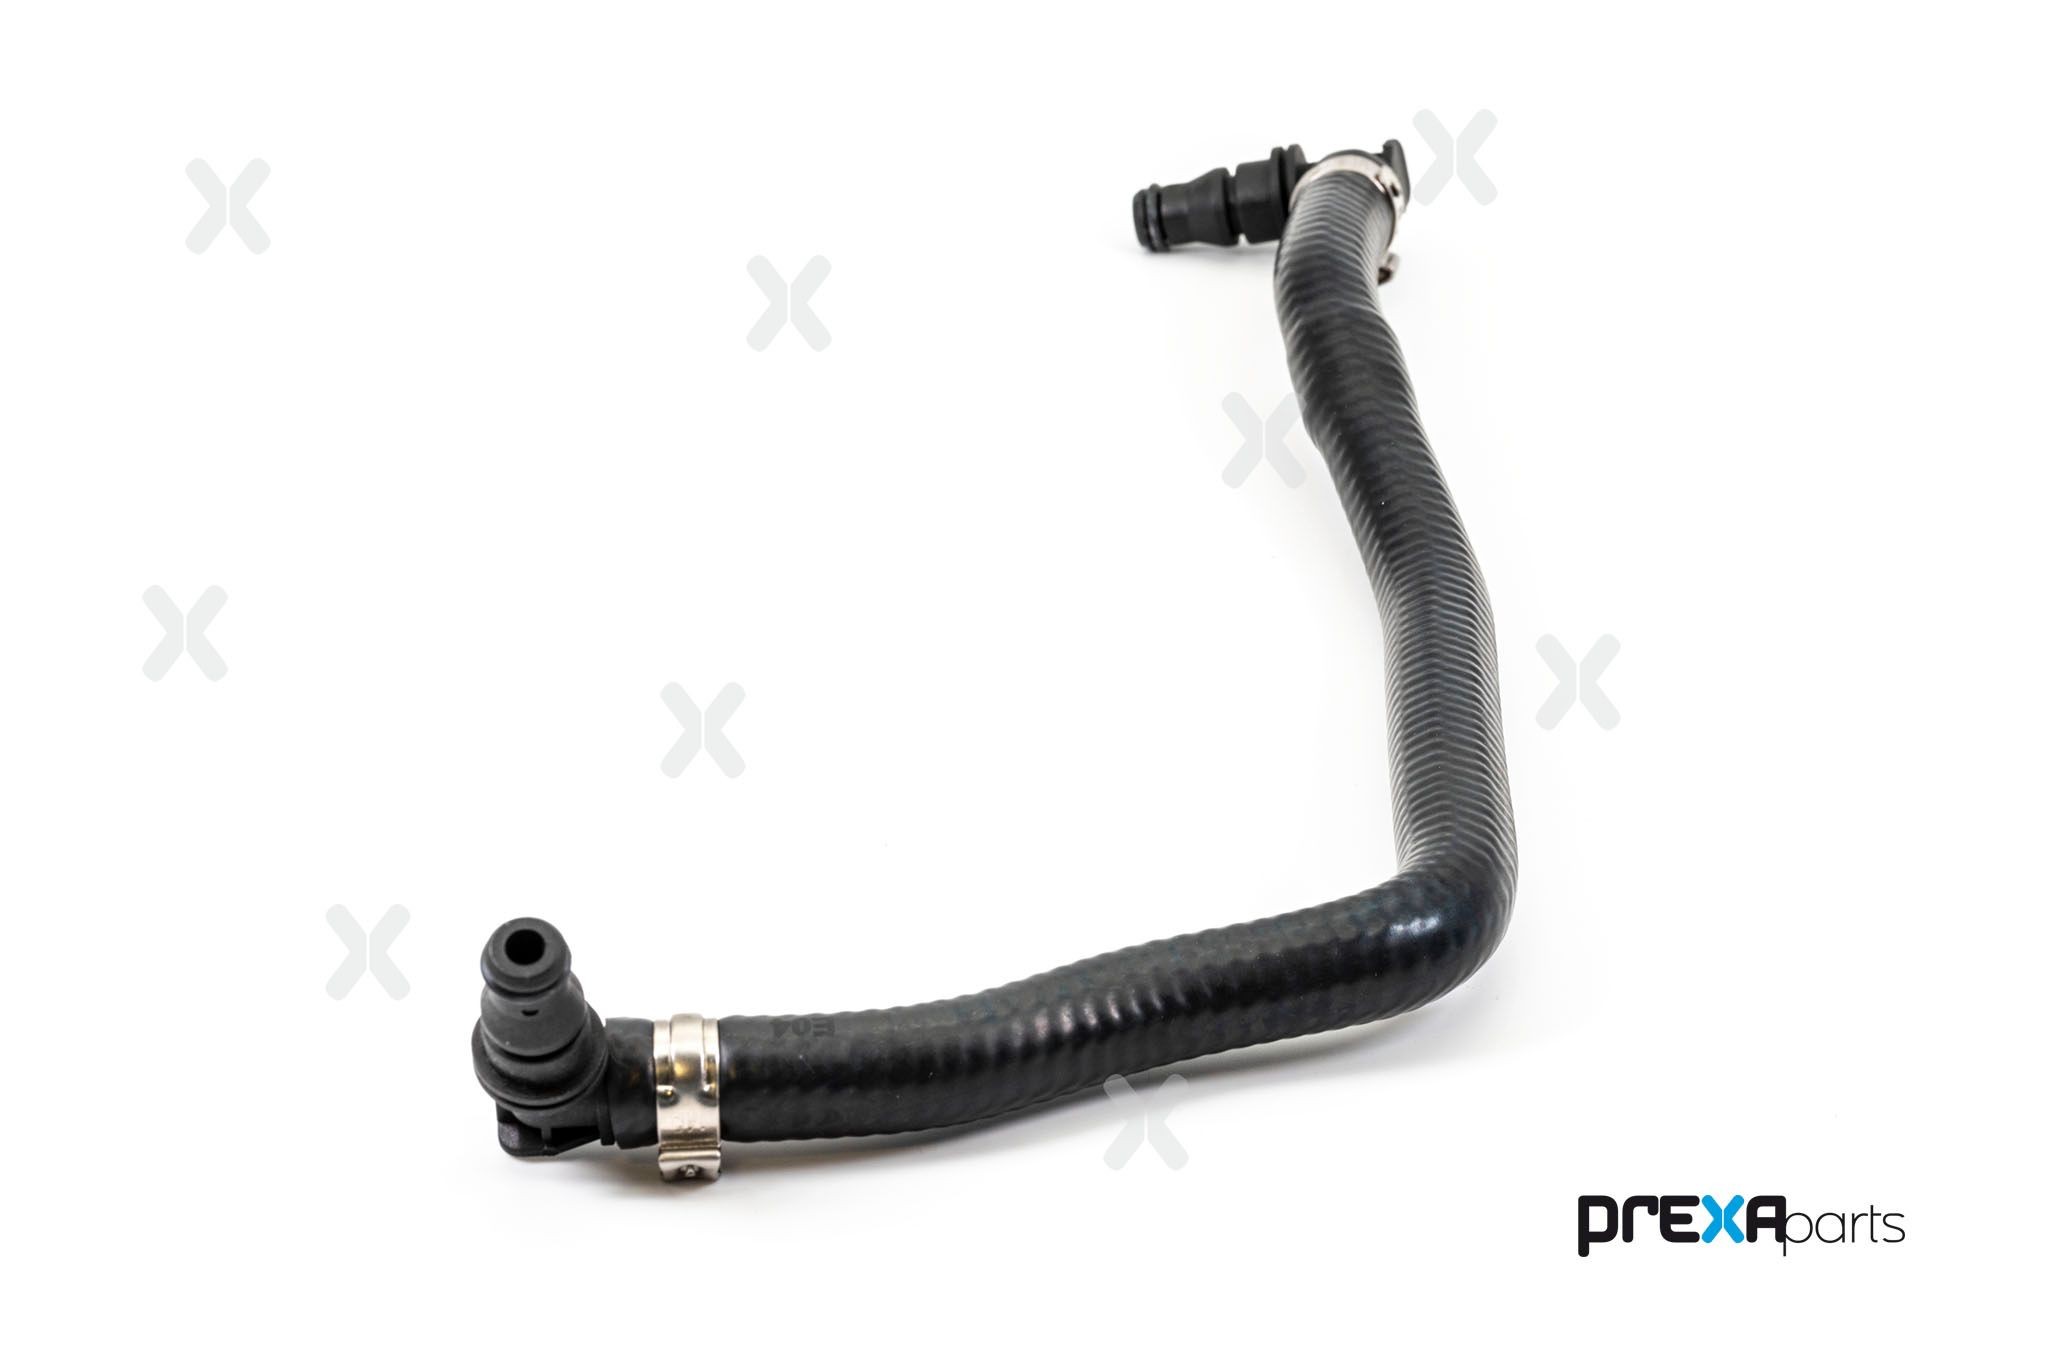 P326146 Radiator Hose PREXAparts P326146 review and test